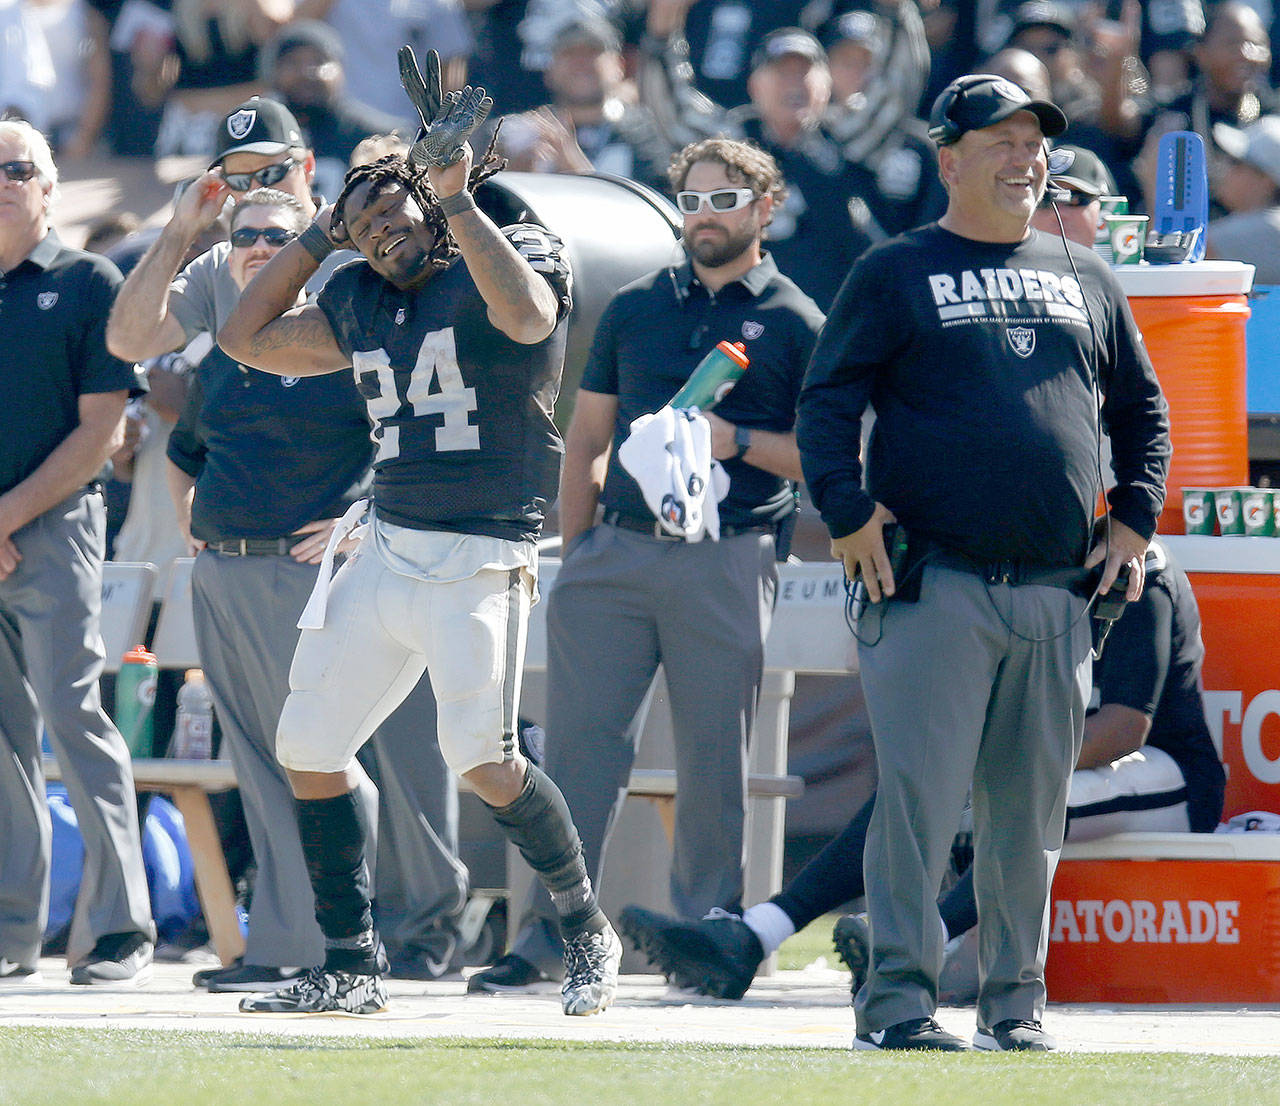 Oakland Raiders’ Marshawn Lynch (24) dances during a time out during a game against the New York Jets in the fourth quarter on Sunday at the Oakland Coliseum. (Nhat V. Meyer/Bay Area News Group/TNS)